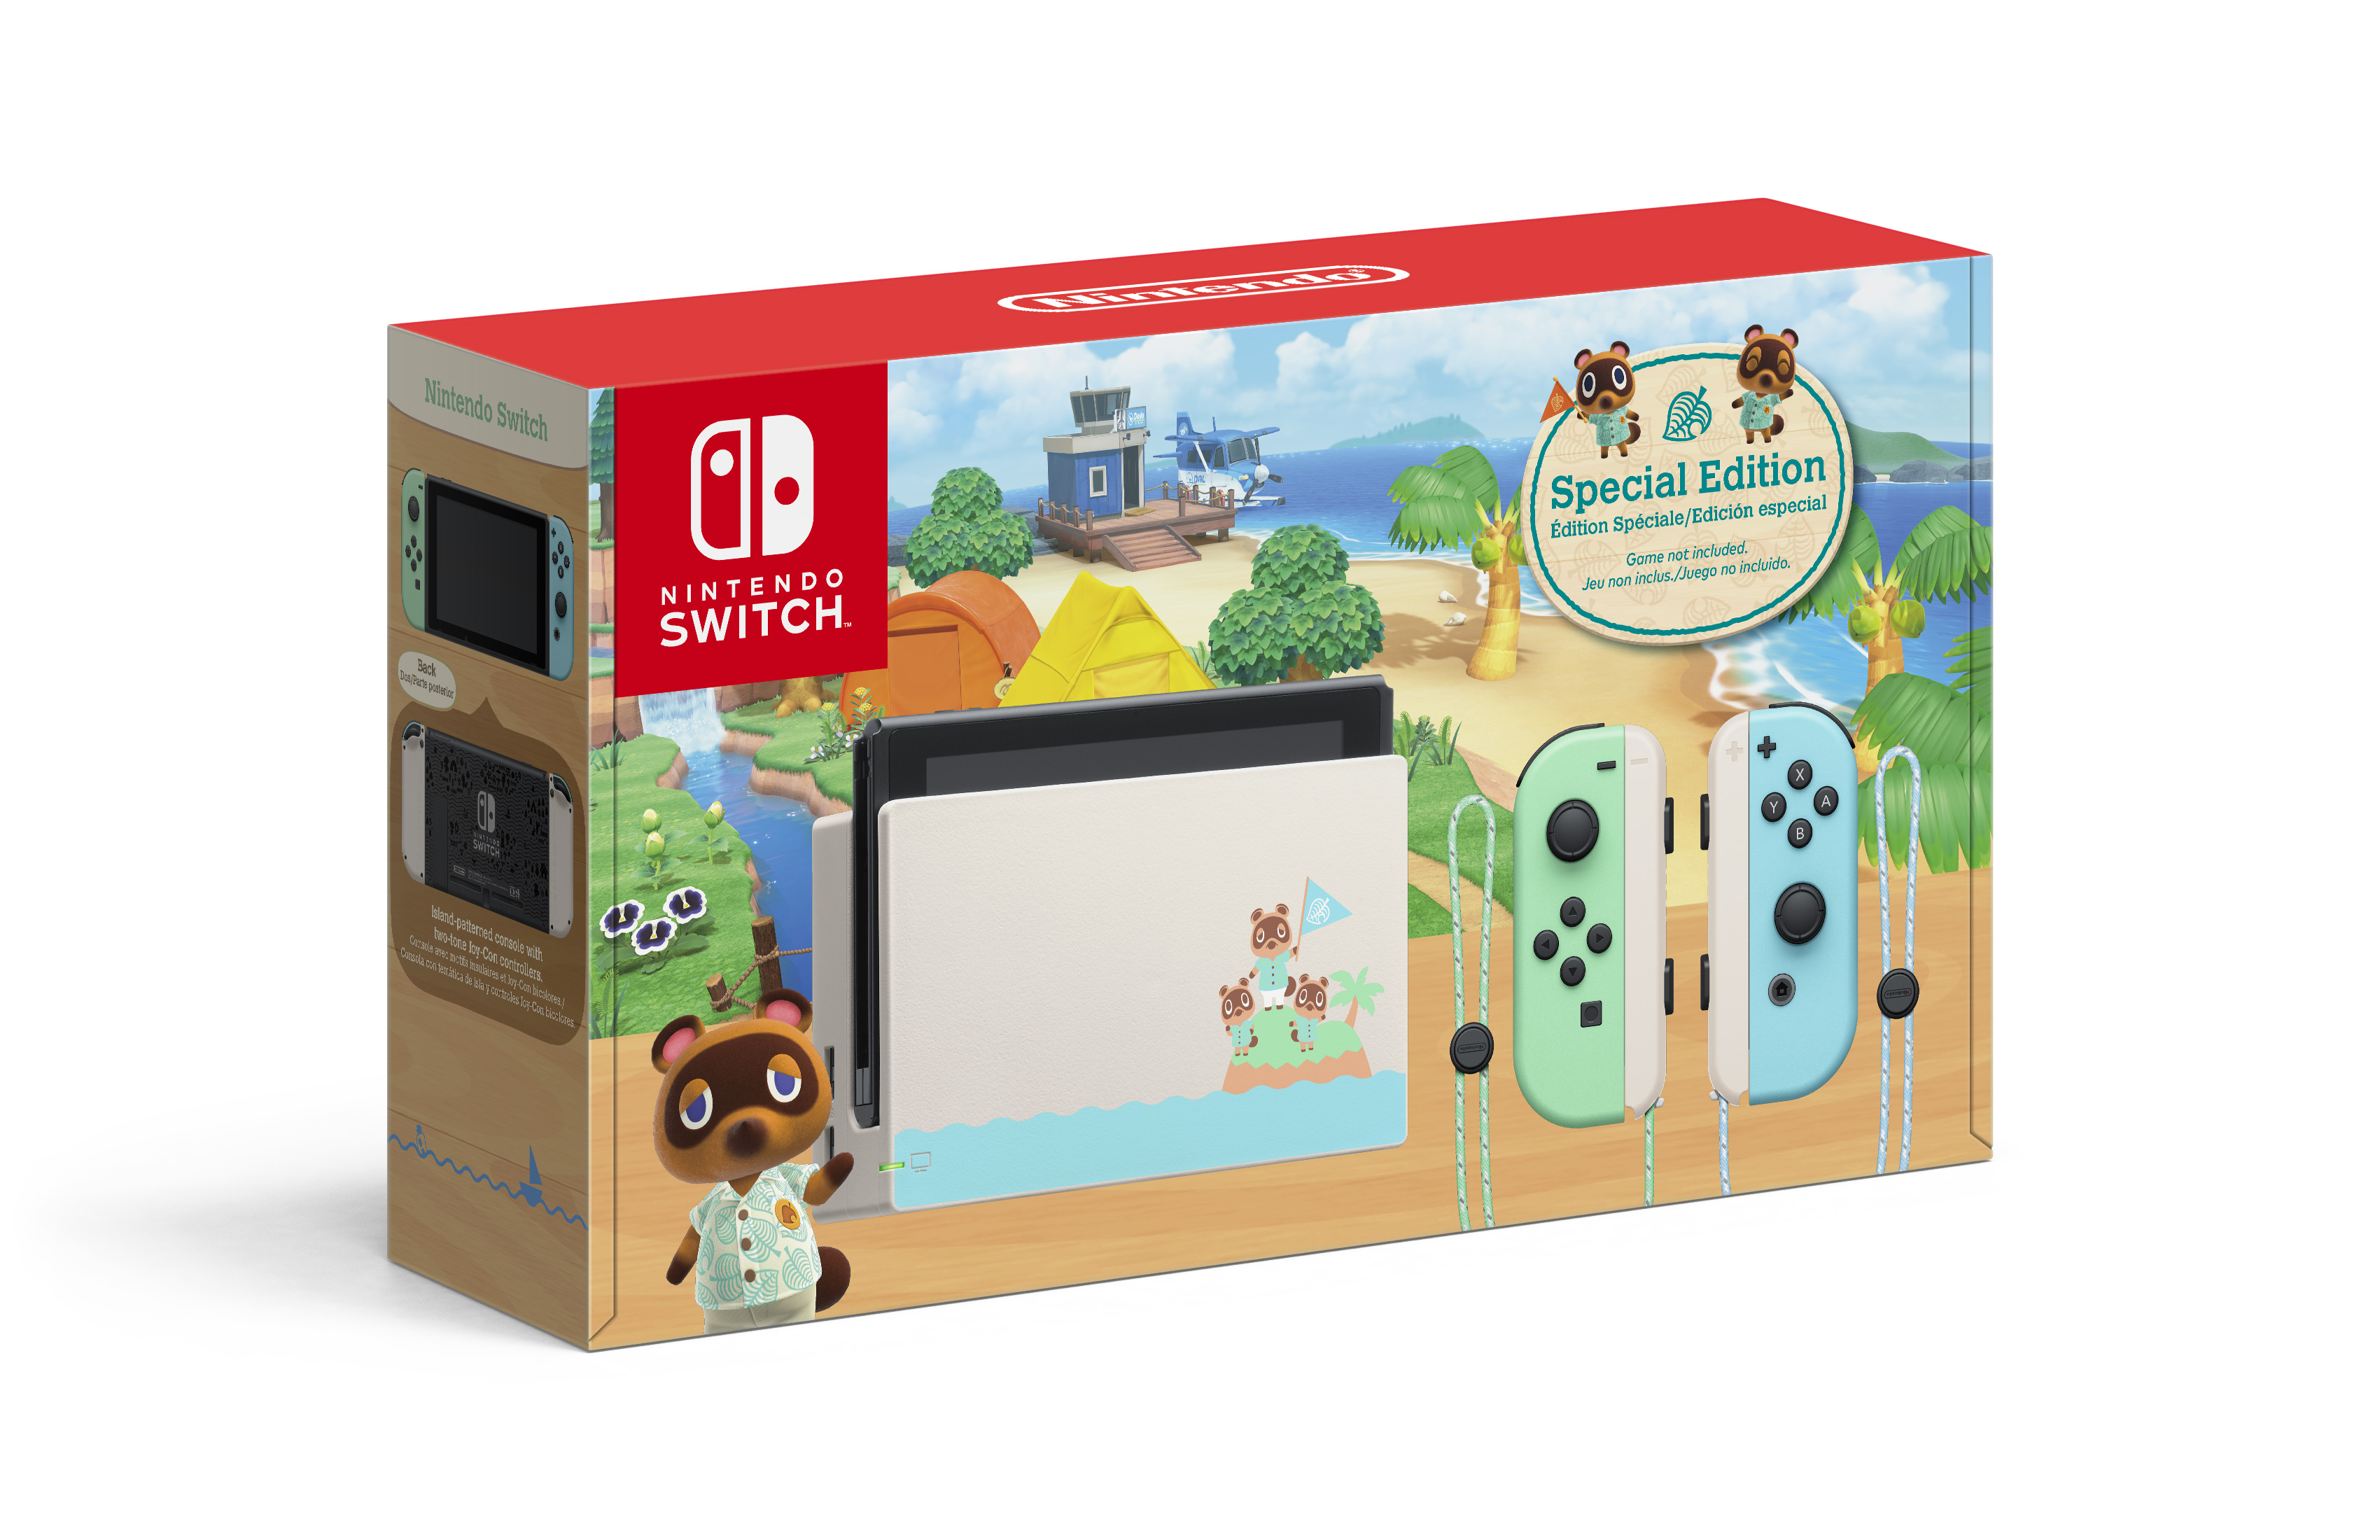 Nintendo Switch Console - Animal Crossing: New Horizons Special Edition [Nintendo Switch System] - image 1 of 9